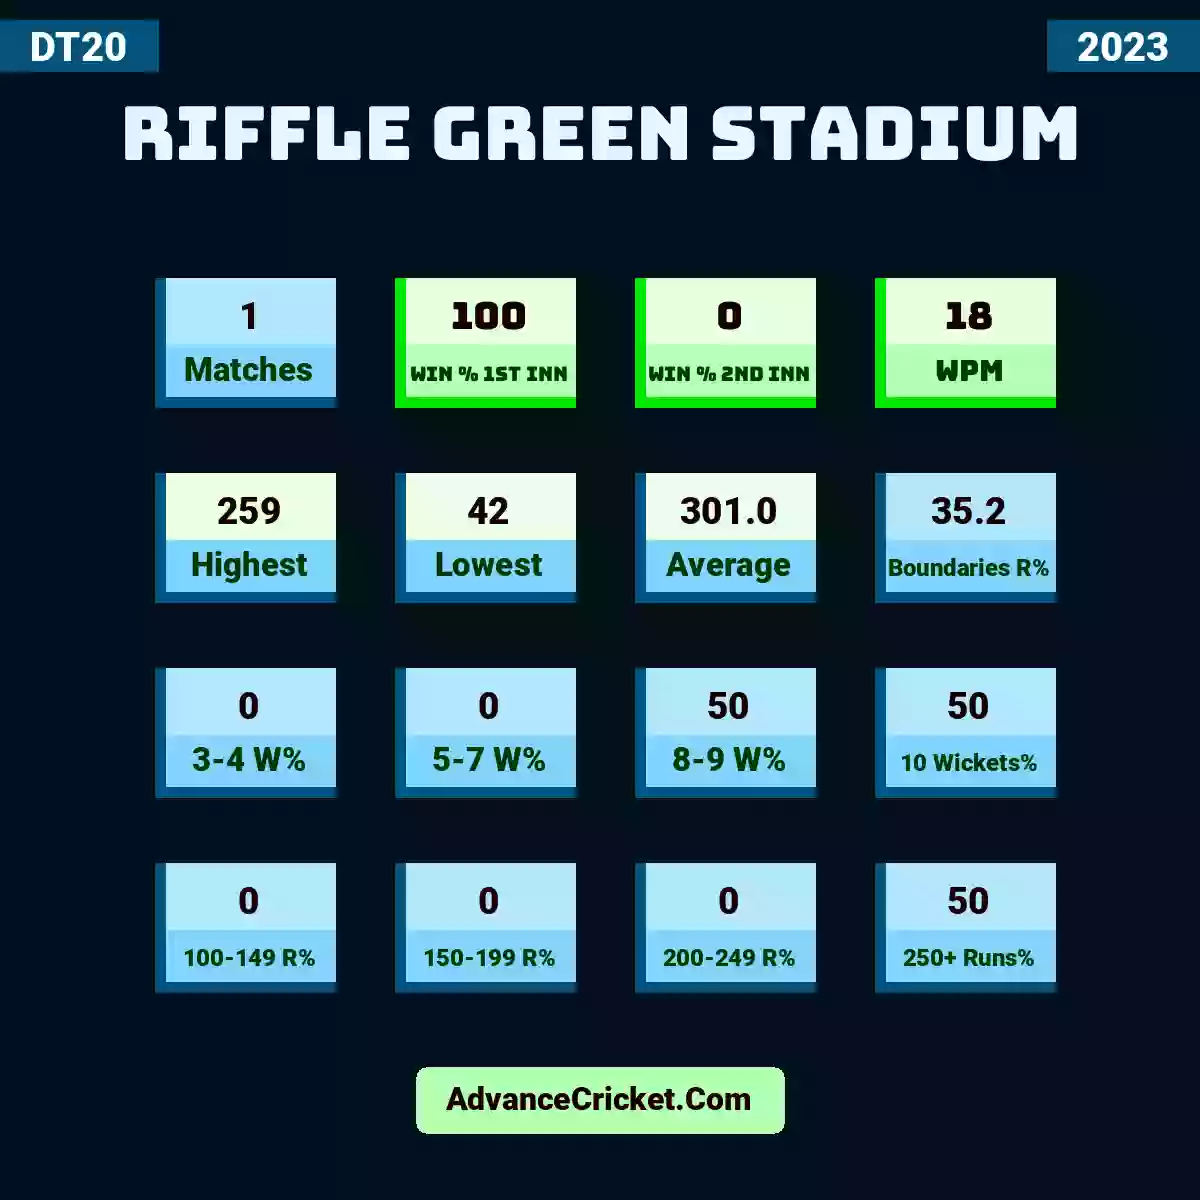 Image showing Riffle Green Stadium with Matches: 1, Win % 1st Inn: 100, Win % 2nd Inn: 0, WPM: 18, Highest: 259, Lowest: 42, Average: 301.0, Boundaries R%: 35.2, 3-4 W%: 0, 5-7 W%: 0, 8-9 W%: 50, 10 Wickets%: 50, 100-149 R%: 0, 150-199 R%: 0, 200-249 R%: 0, 250+ Runs%: 50.